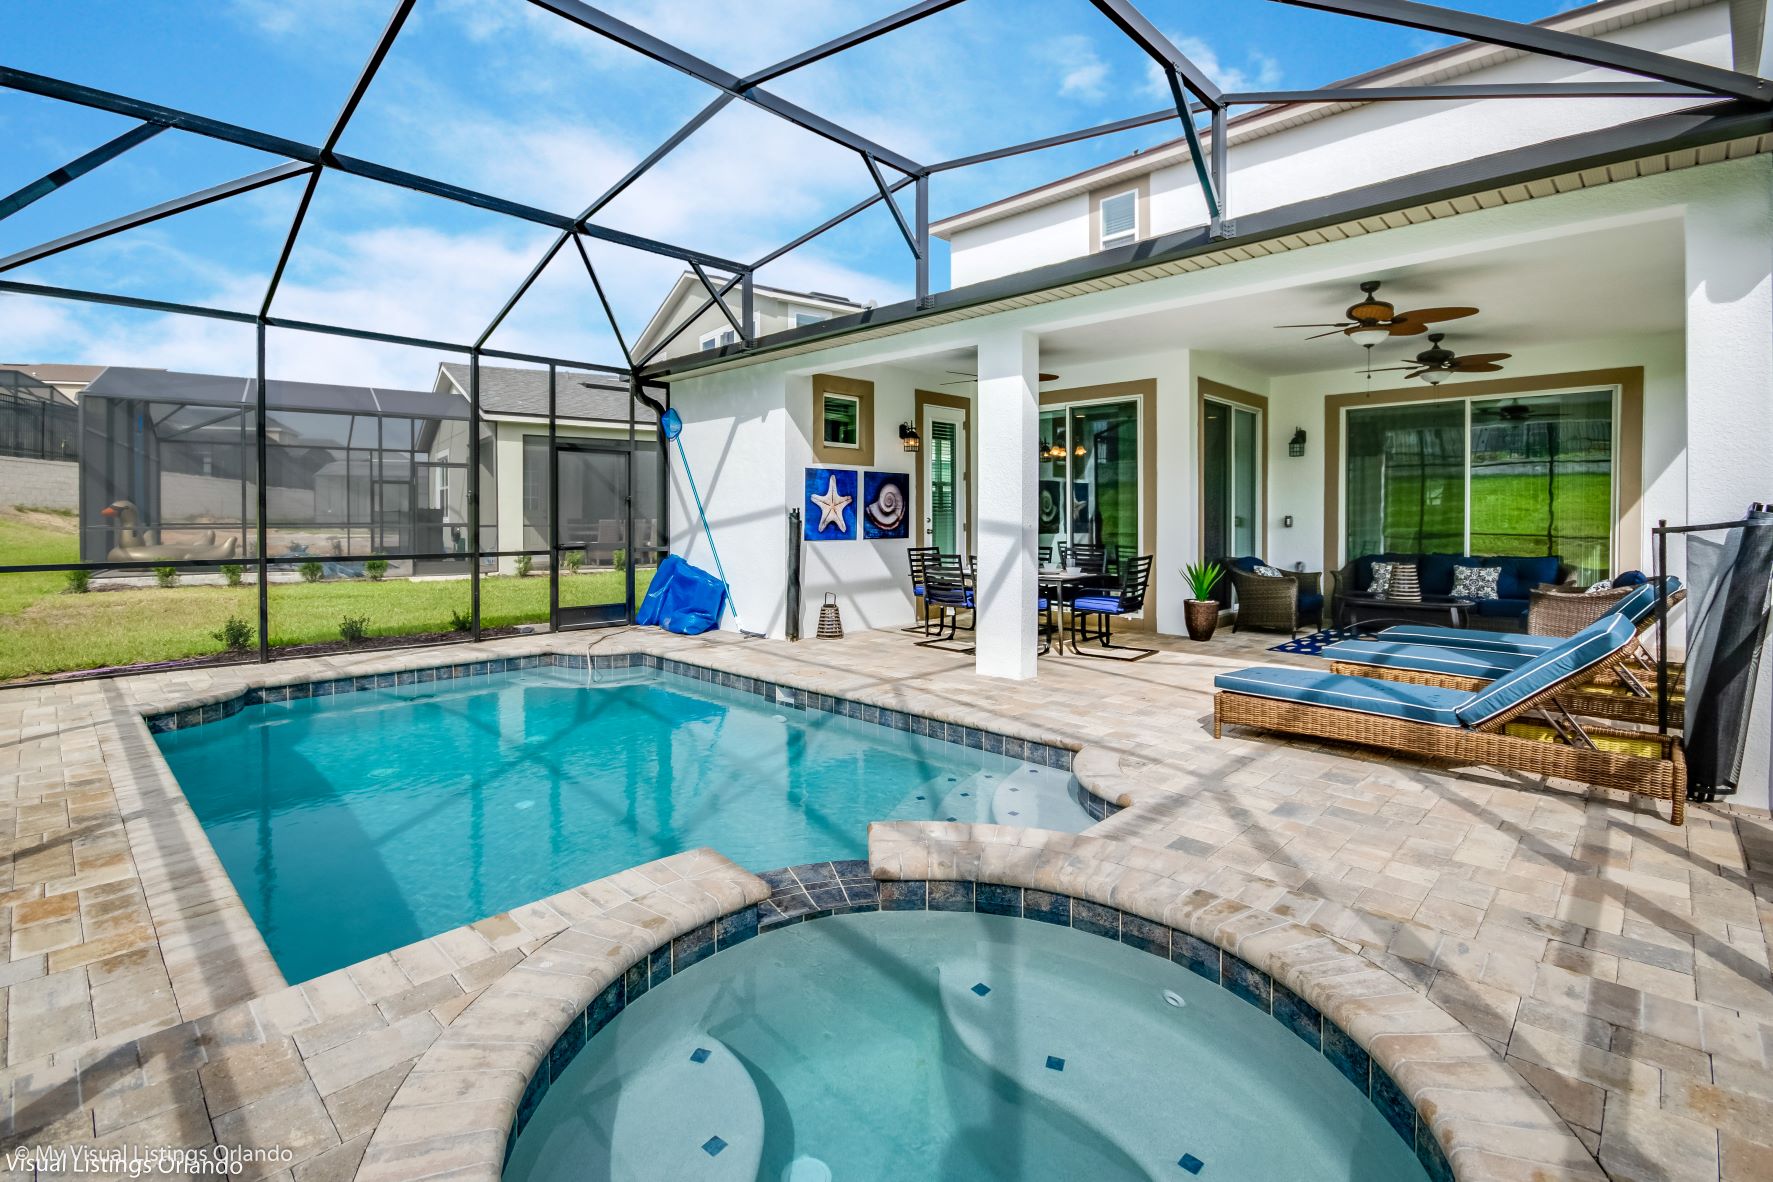 Peasant private pool area of the villa in Kissimmee Florida - Sparkling waters beckoning you to take a leisurely swim - Inviting poolside loungers for basking in the sunshine